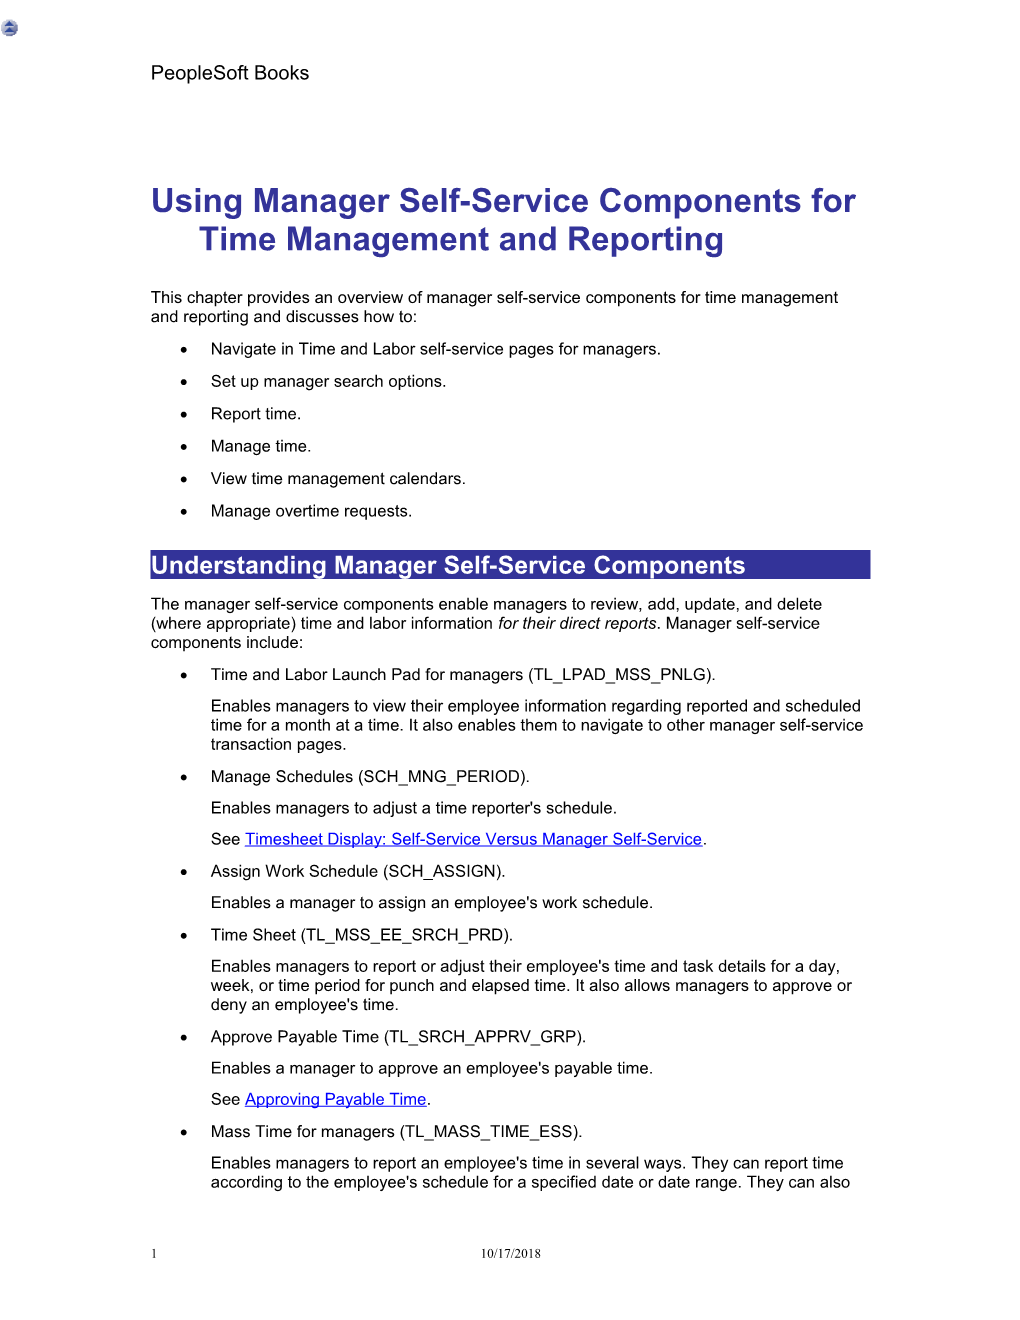 Using Manager Self-Service Components for Time Management and Reporting